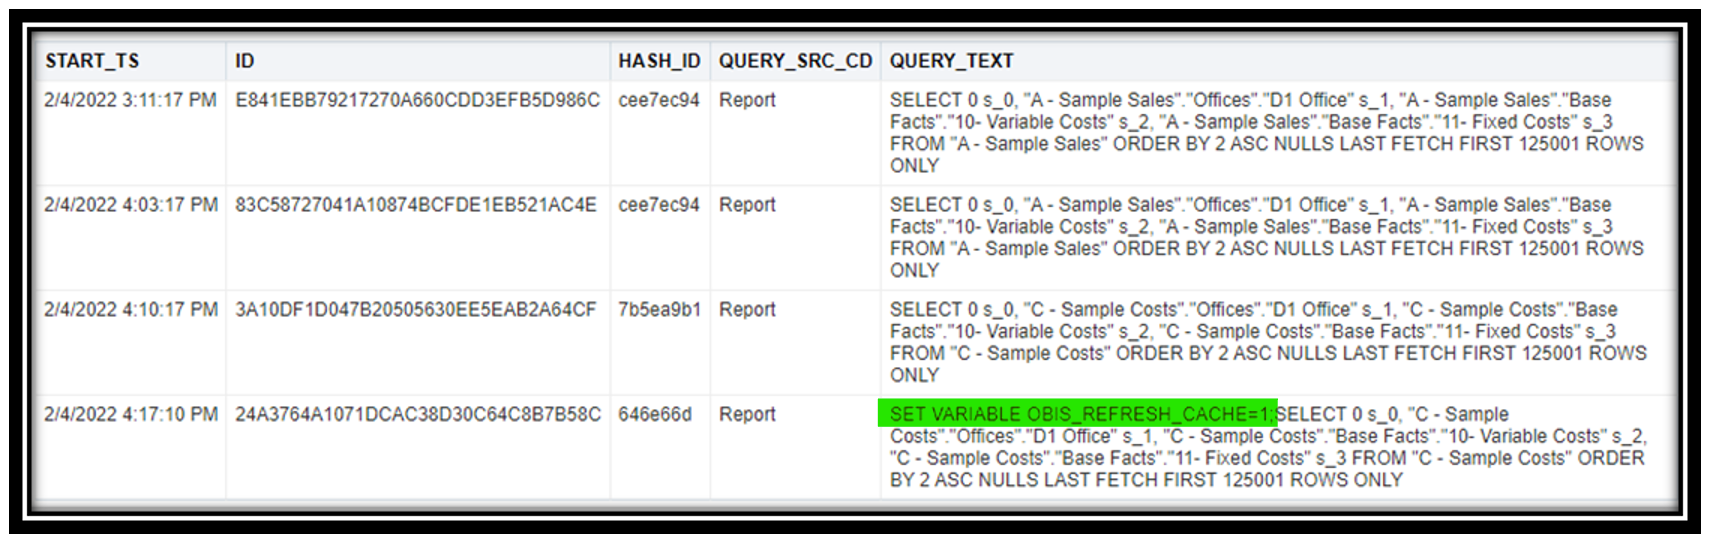 Description of ceal_usage_tracking_logical_table_query_eight.jpg follows